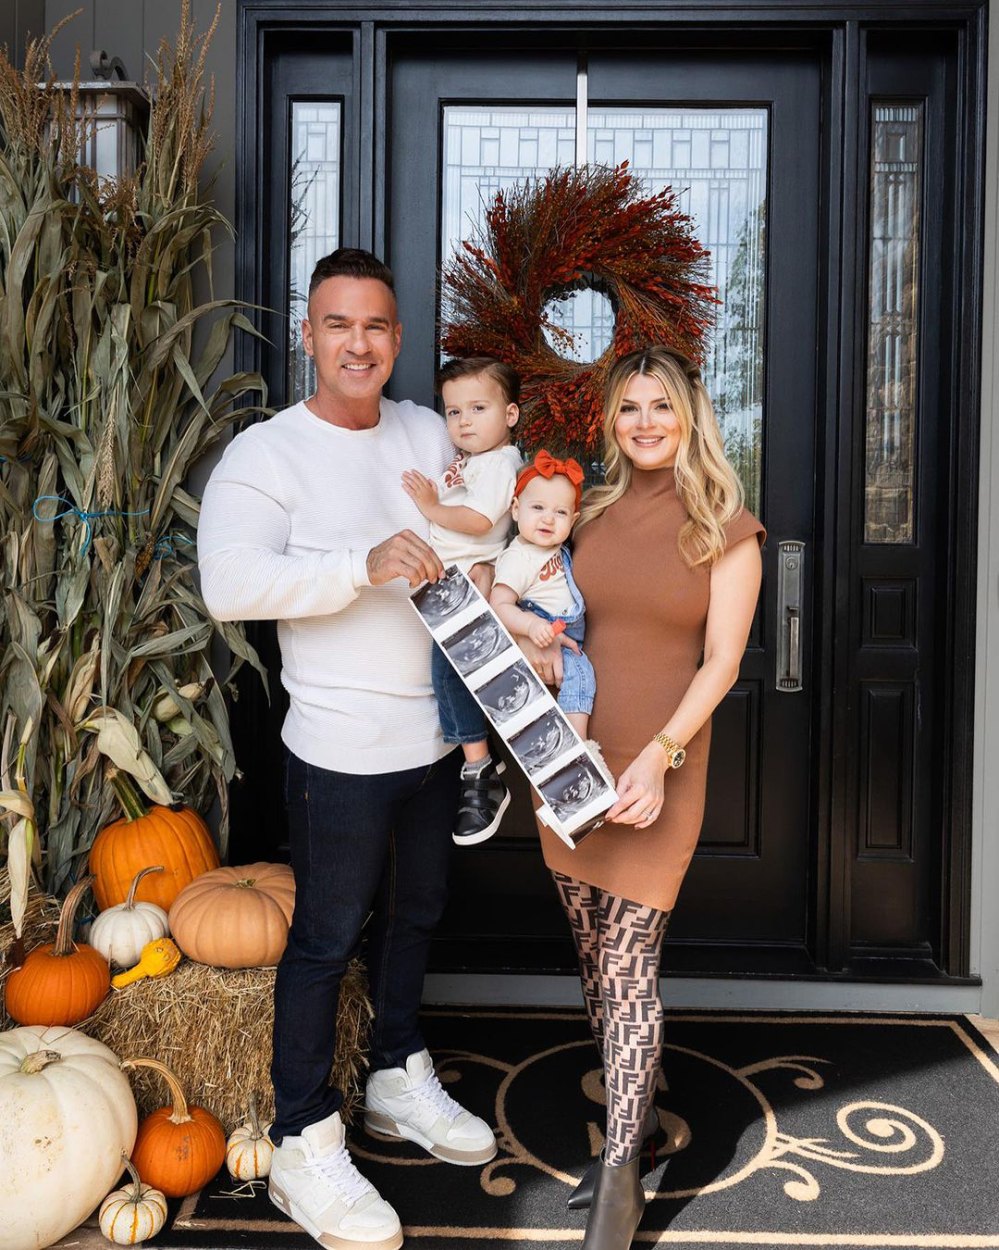 Mike ‘The Situation’ Sorrentino and Wife Lauren Are Expecting Baby No. 3: ‘Good Things Come in 3s’